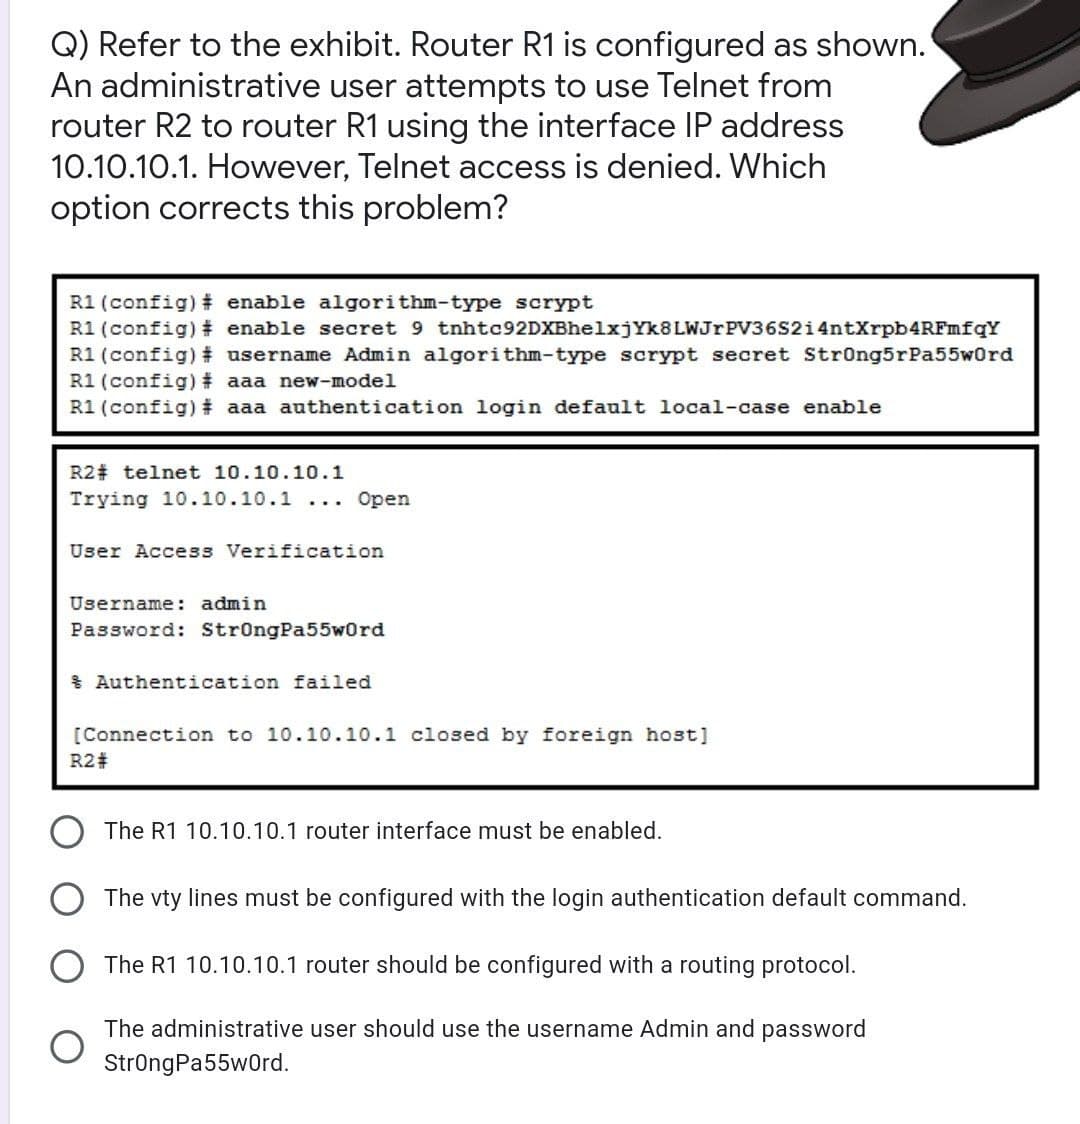 Q) Refer to the exhibit. Router R1 is configured as shown.
An administrative user attempts to use Telnet from
router R2 to router R1 using the interface IP address
10.10.10.1. However, Telnet access is denied. Which
option corrects this problem?
R1 (config)# enable algorithm-type scrypt
R1(config)# enable secret 9 tnhtc92DXBhelxjYk8LWJrPV36S2i4ntXrpb4RFmfqY
R1(config)# username Admin algorithm-type scrypt secret Strong5rPa55w0rd
R1(config)# aaa new-model
R1(config)# aaa authentication login default local-case enable
R2 telnet 10.10.10.1
Trying 10.10.10.1
Open
...
User Access Verification
Username: admin
Password: StrongPa55w0rd
Authentication failed
[Connection to 10.10.10.1 closed by foreign host]
R2#
The R1 10.10.10.1 router interface must be enabled.
The vty lines must be configured with the login authentication default command.
The R1 10.10.10.1 router should be configured with a routing protocol.
The administrative user should use the username Admin and password
StrongPa55wOrd.